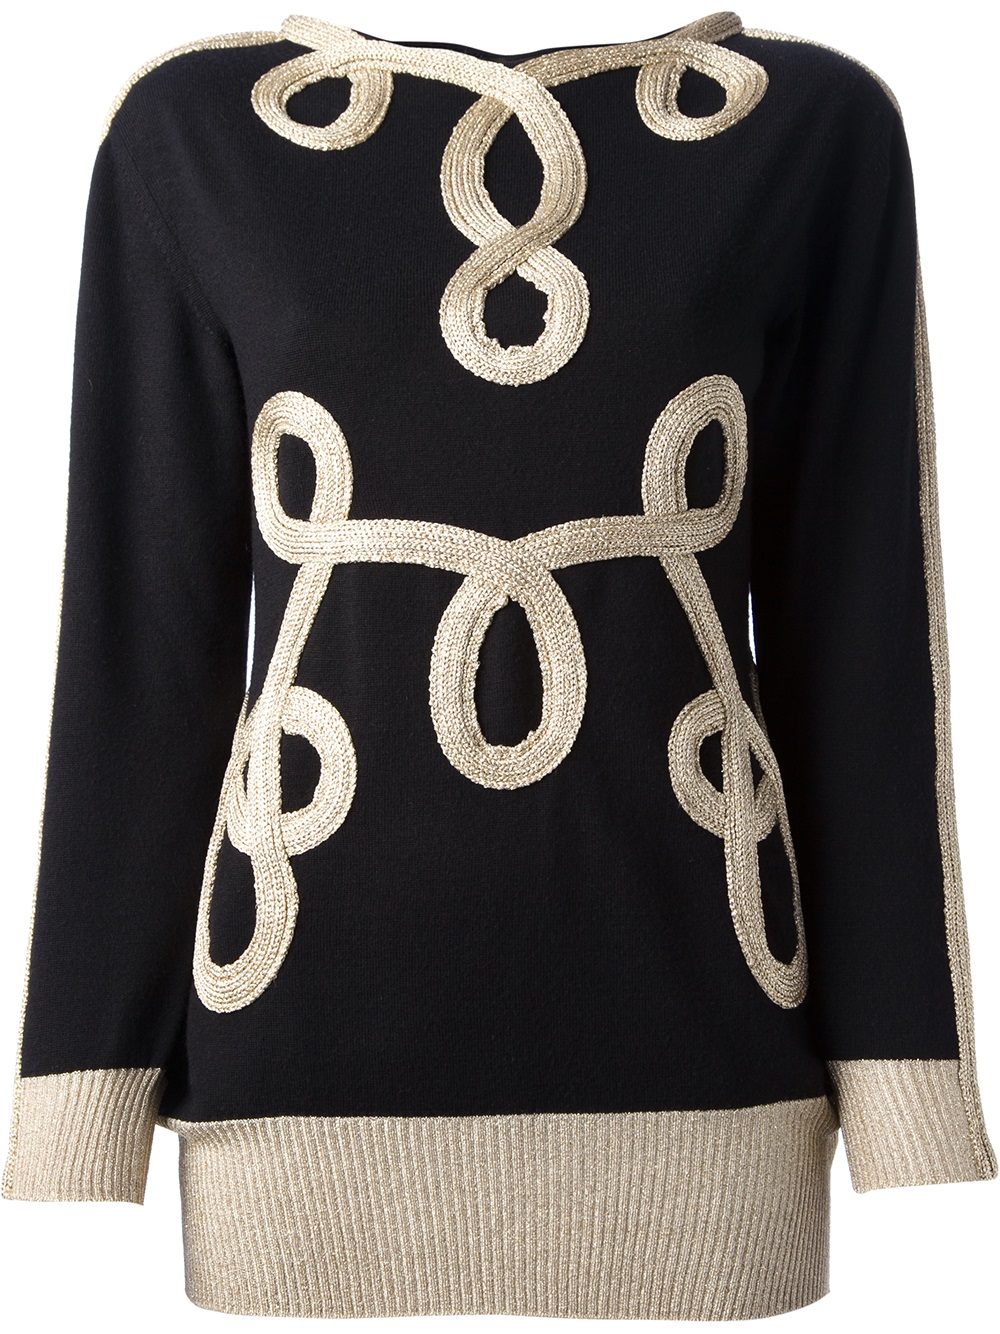 MOSCHINO Embroidered Sweater: Click Here